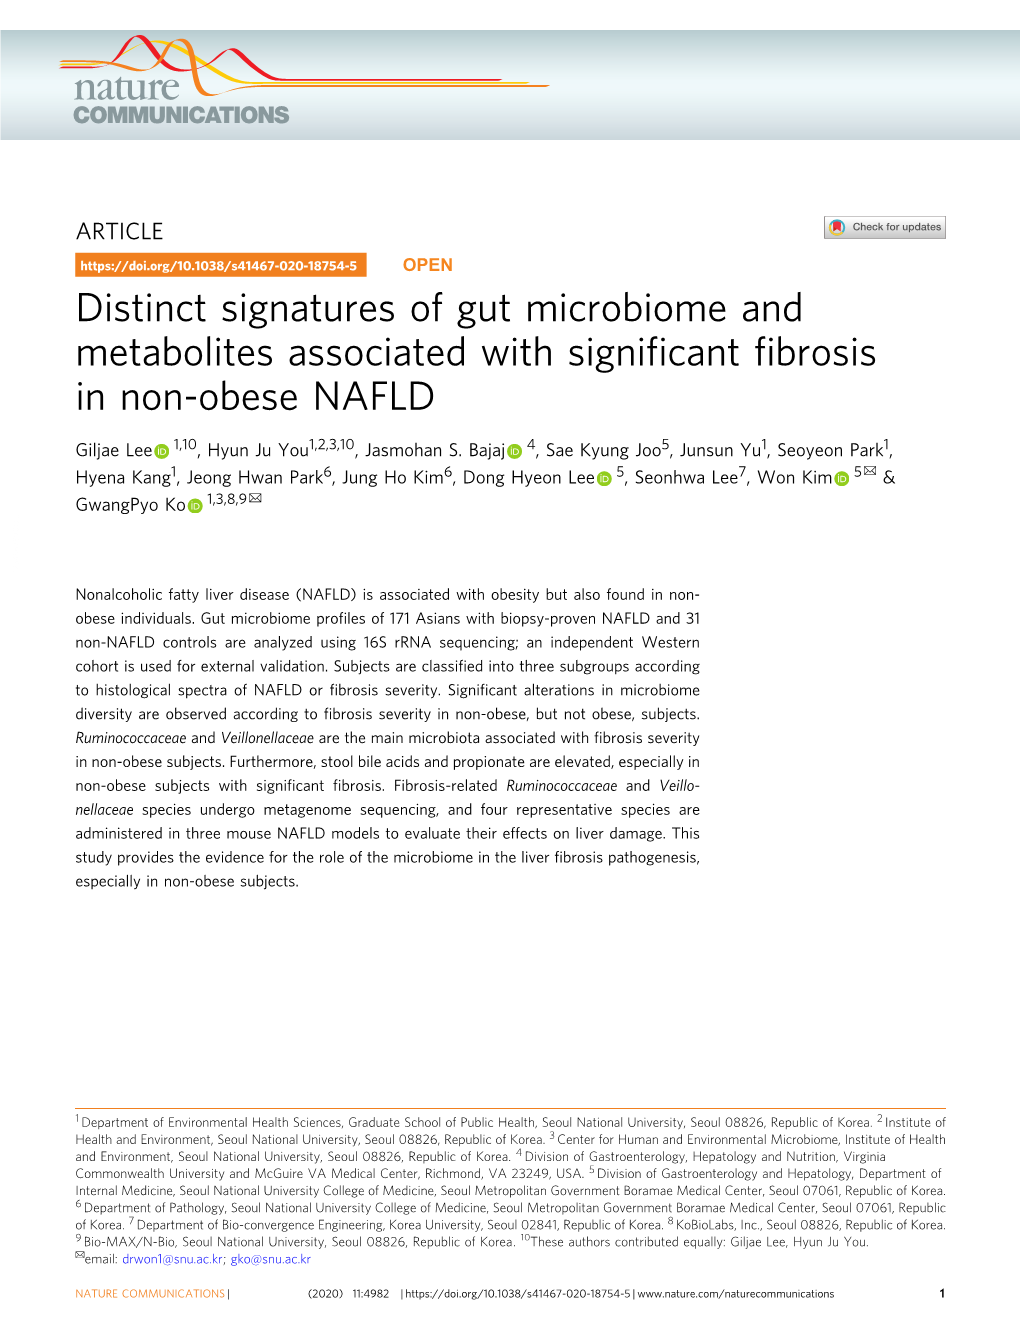 Distinct Signatures of Gut Microbiome and Metabolites Associated with Significant Fibrosis in Non-Obese NAFLD